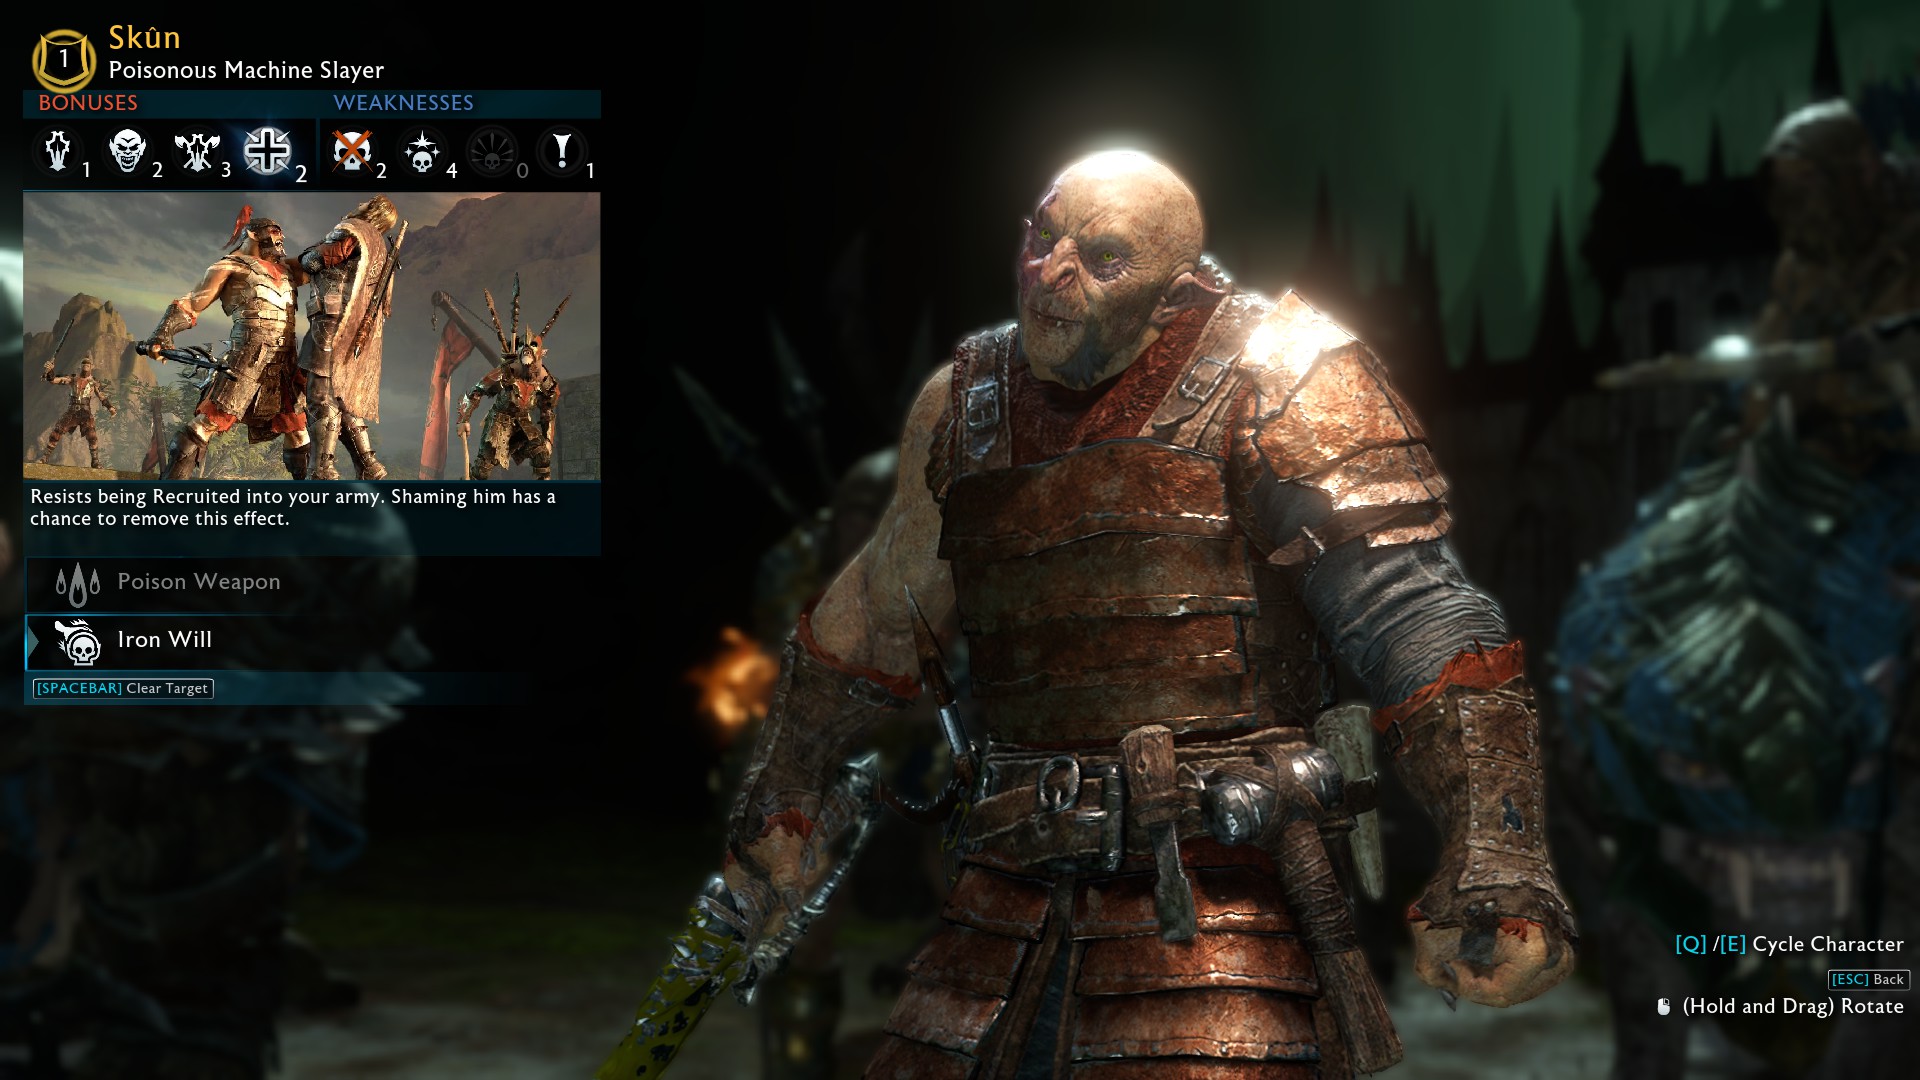 Iron of Death achievement in Middle-earth: Shadow of Mordor